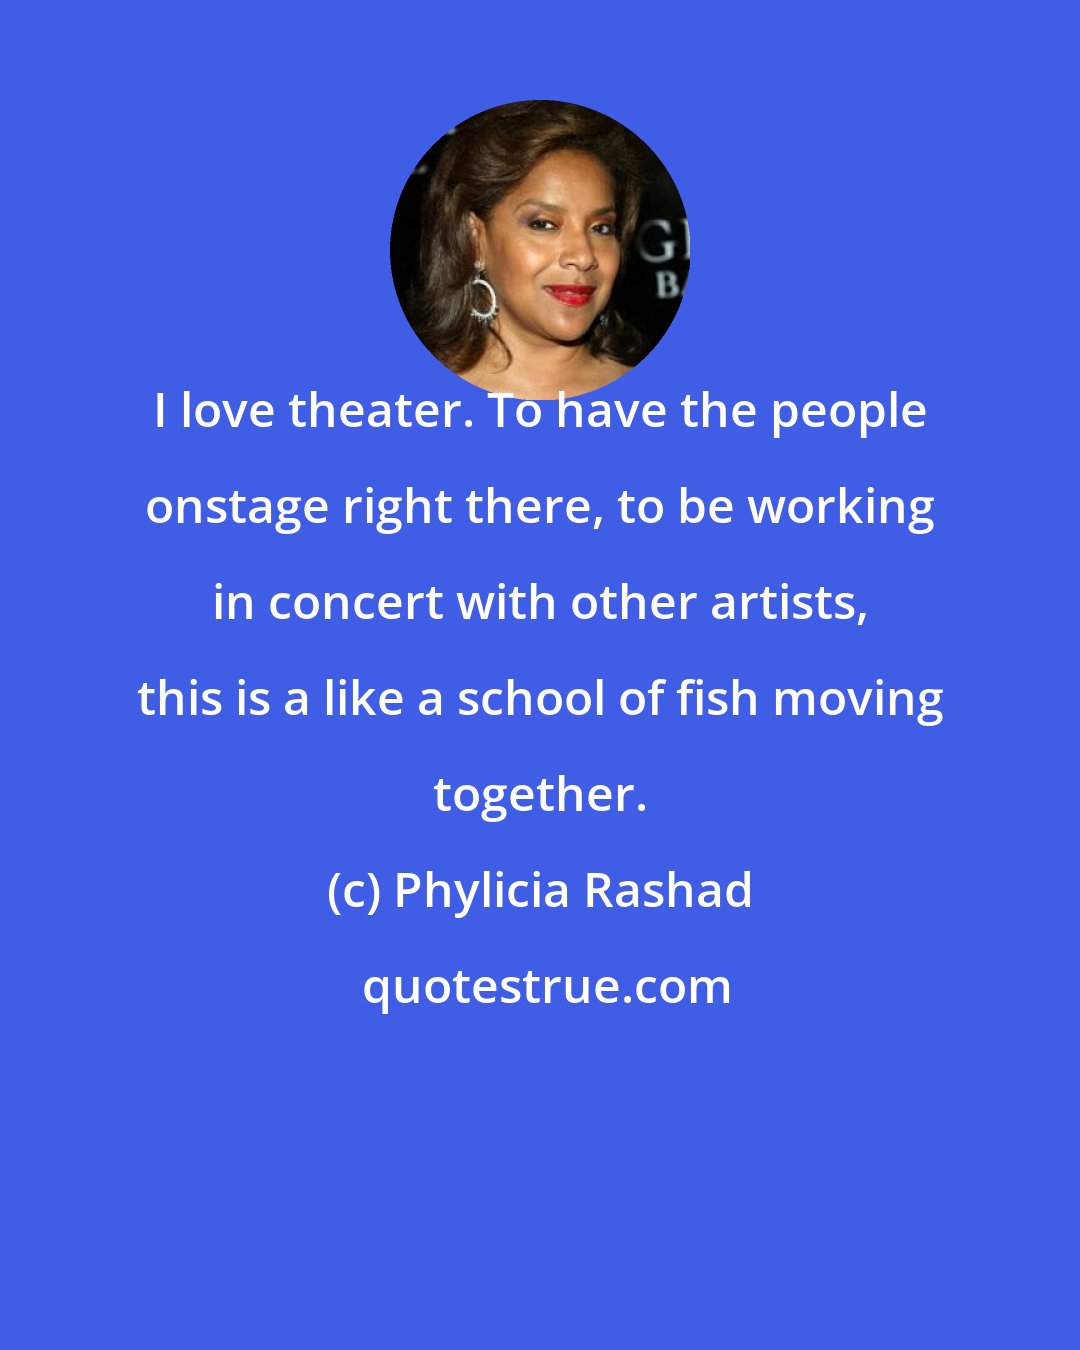 Phylicia Rashad: I love theater. To have the people onstage right there, to be working in concert with other artists, this is a like a school of fish moving together.